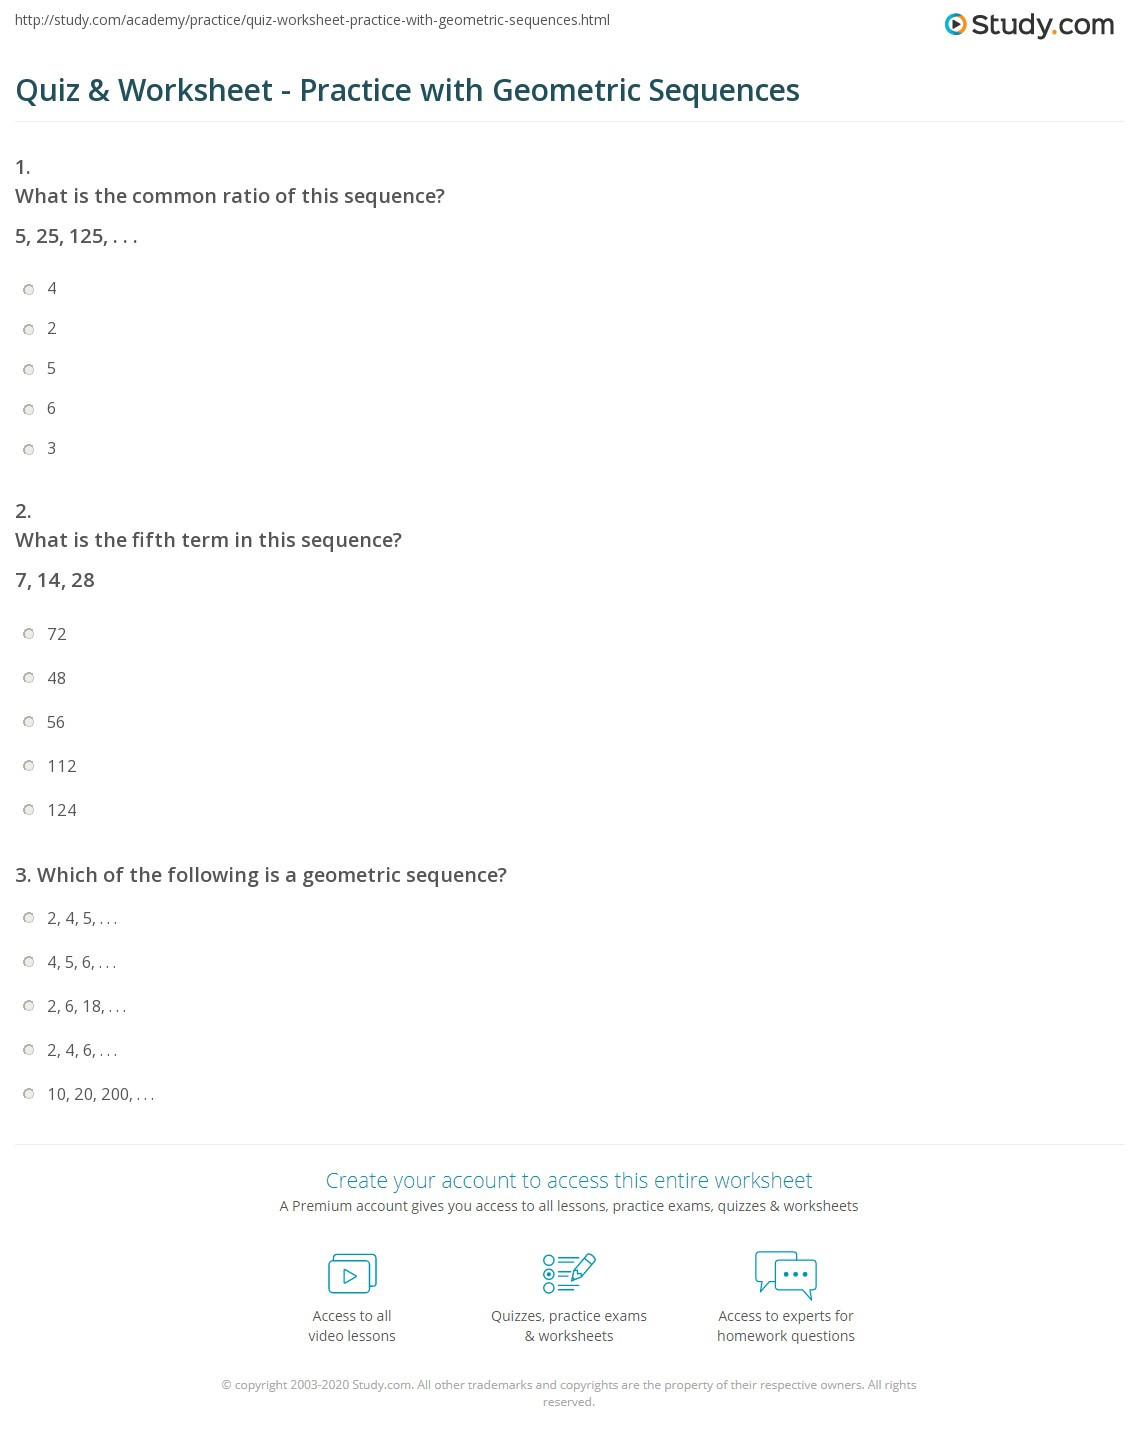 Geometric Sequence Worksheet Answers Quiz &amp; Worksheet Practice with Geometric Sequences